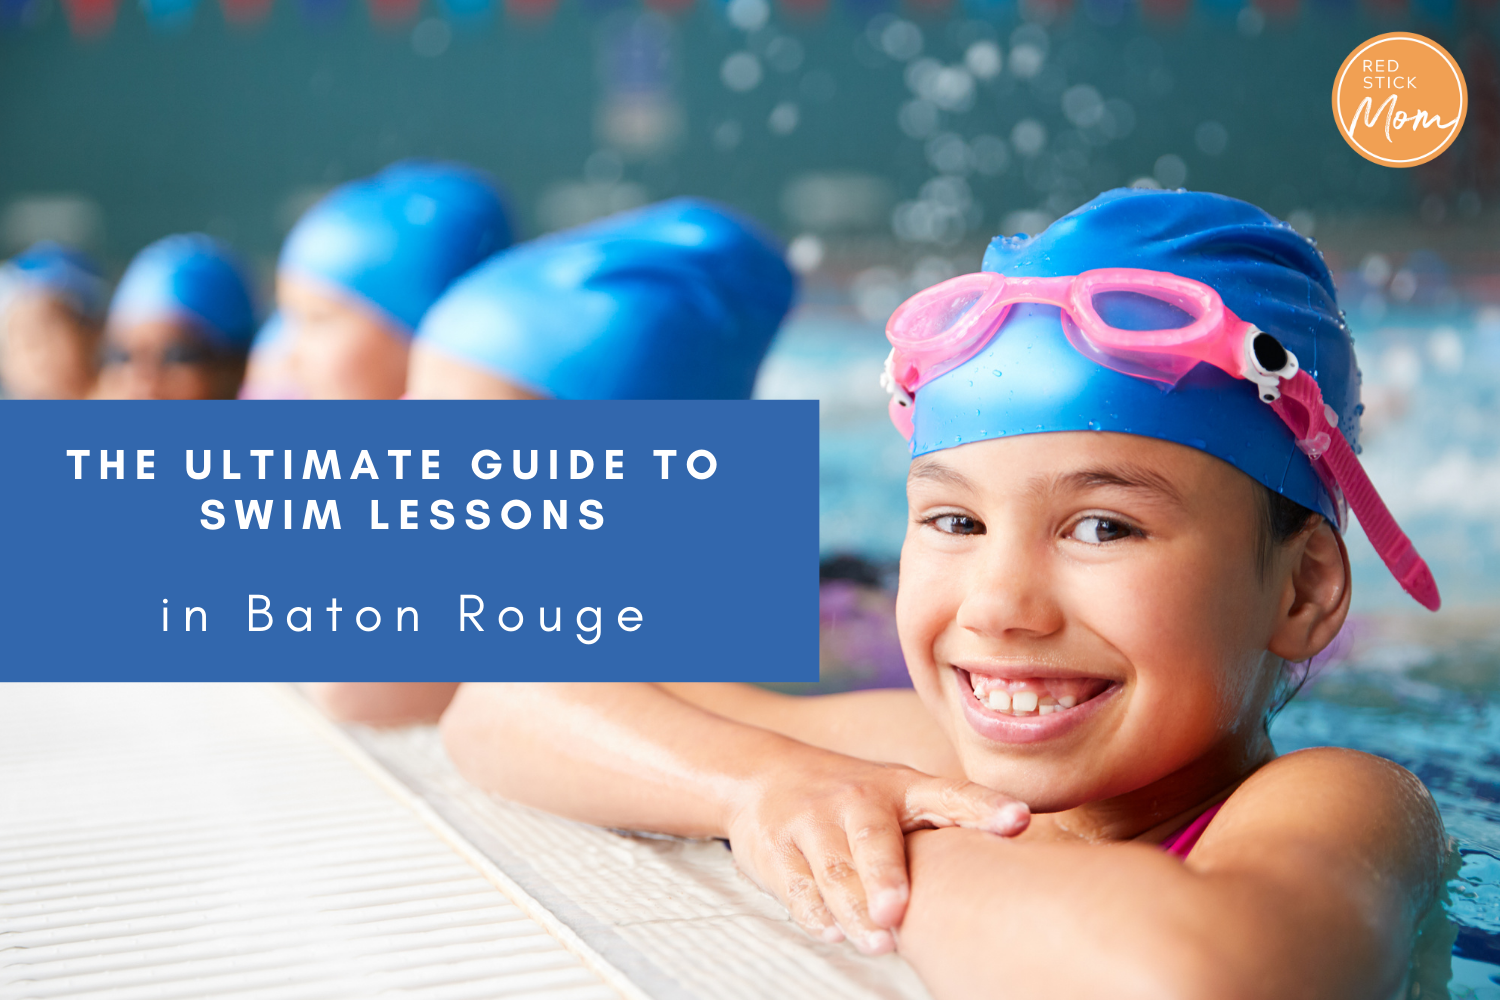 Where to take swim lessons in Baton Rouge?